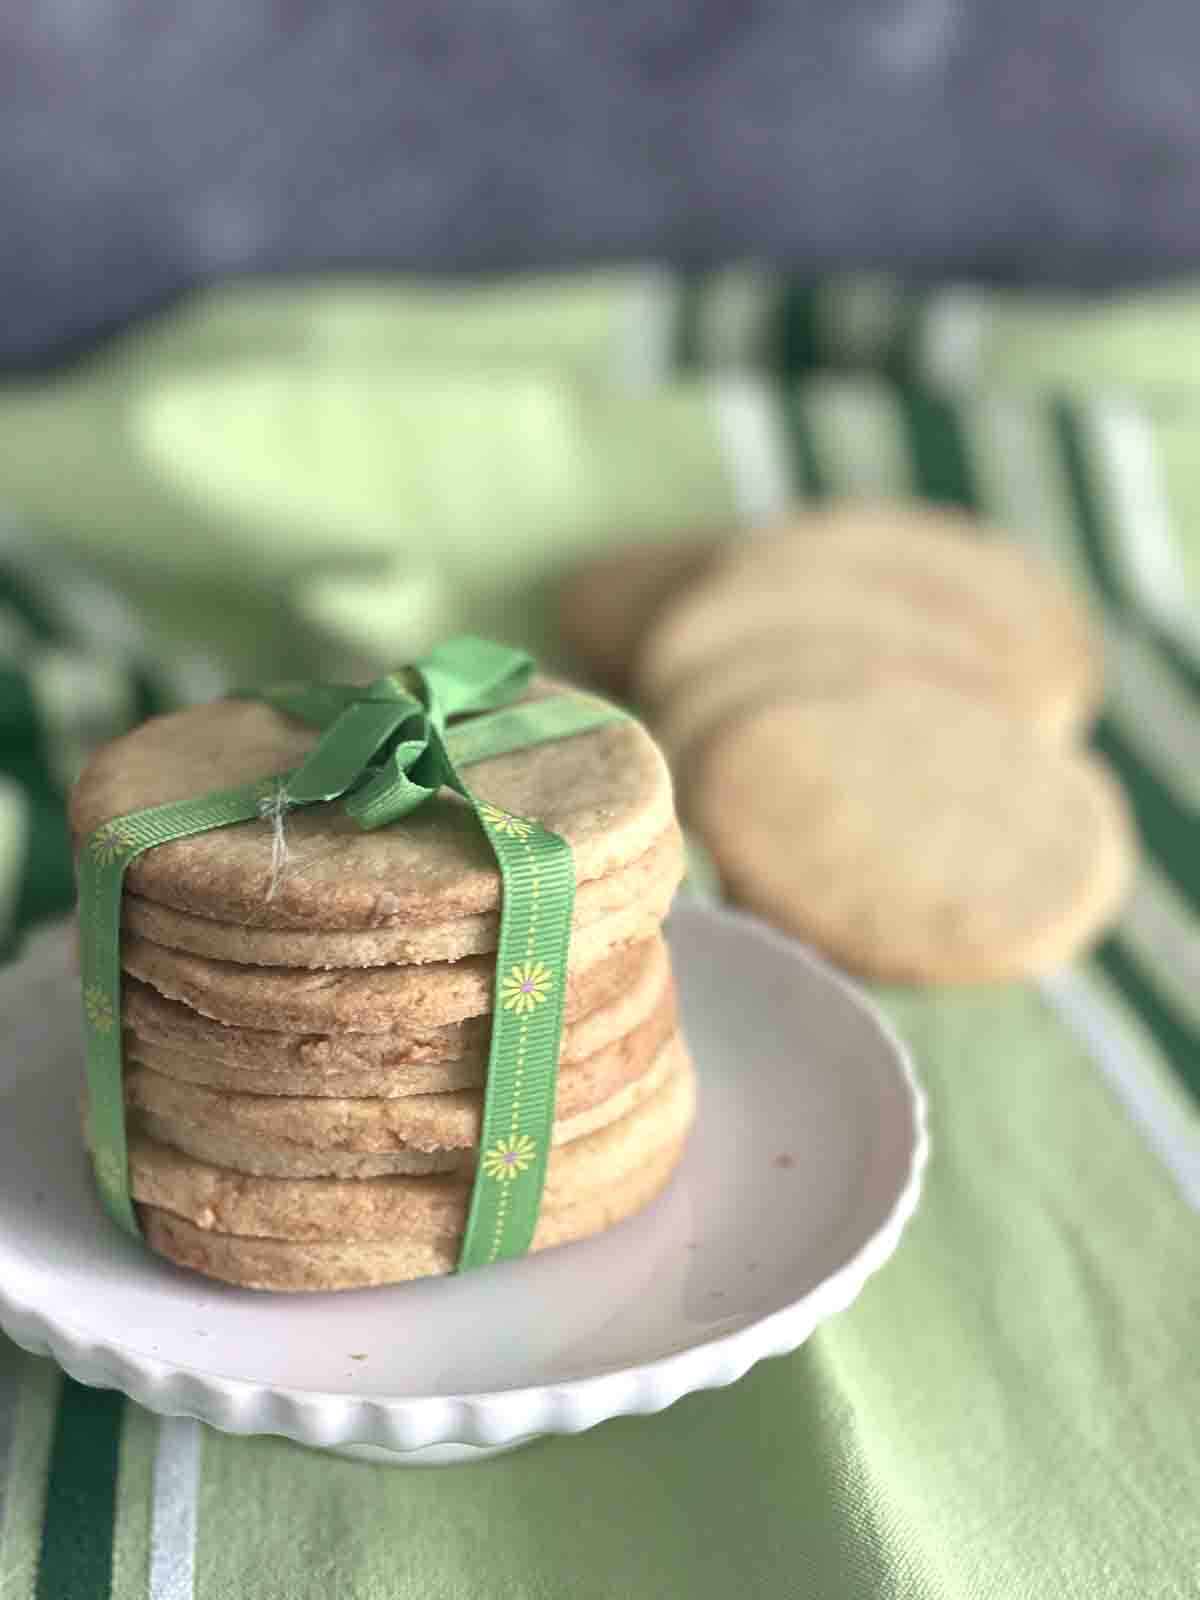 biscuits tied up with a green ribbon.